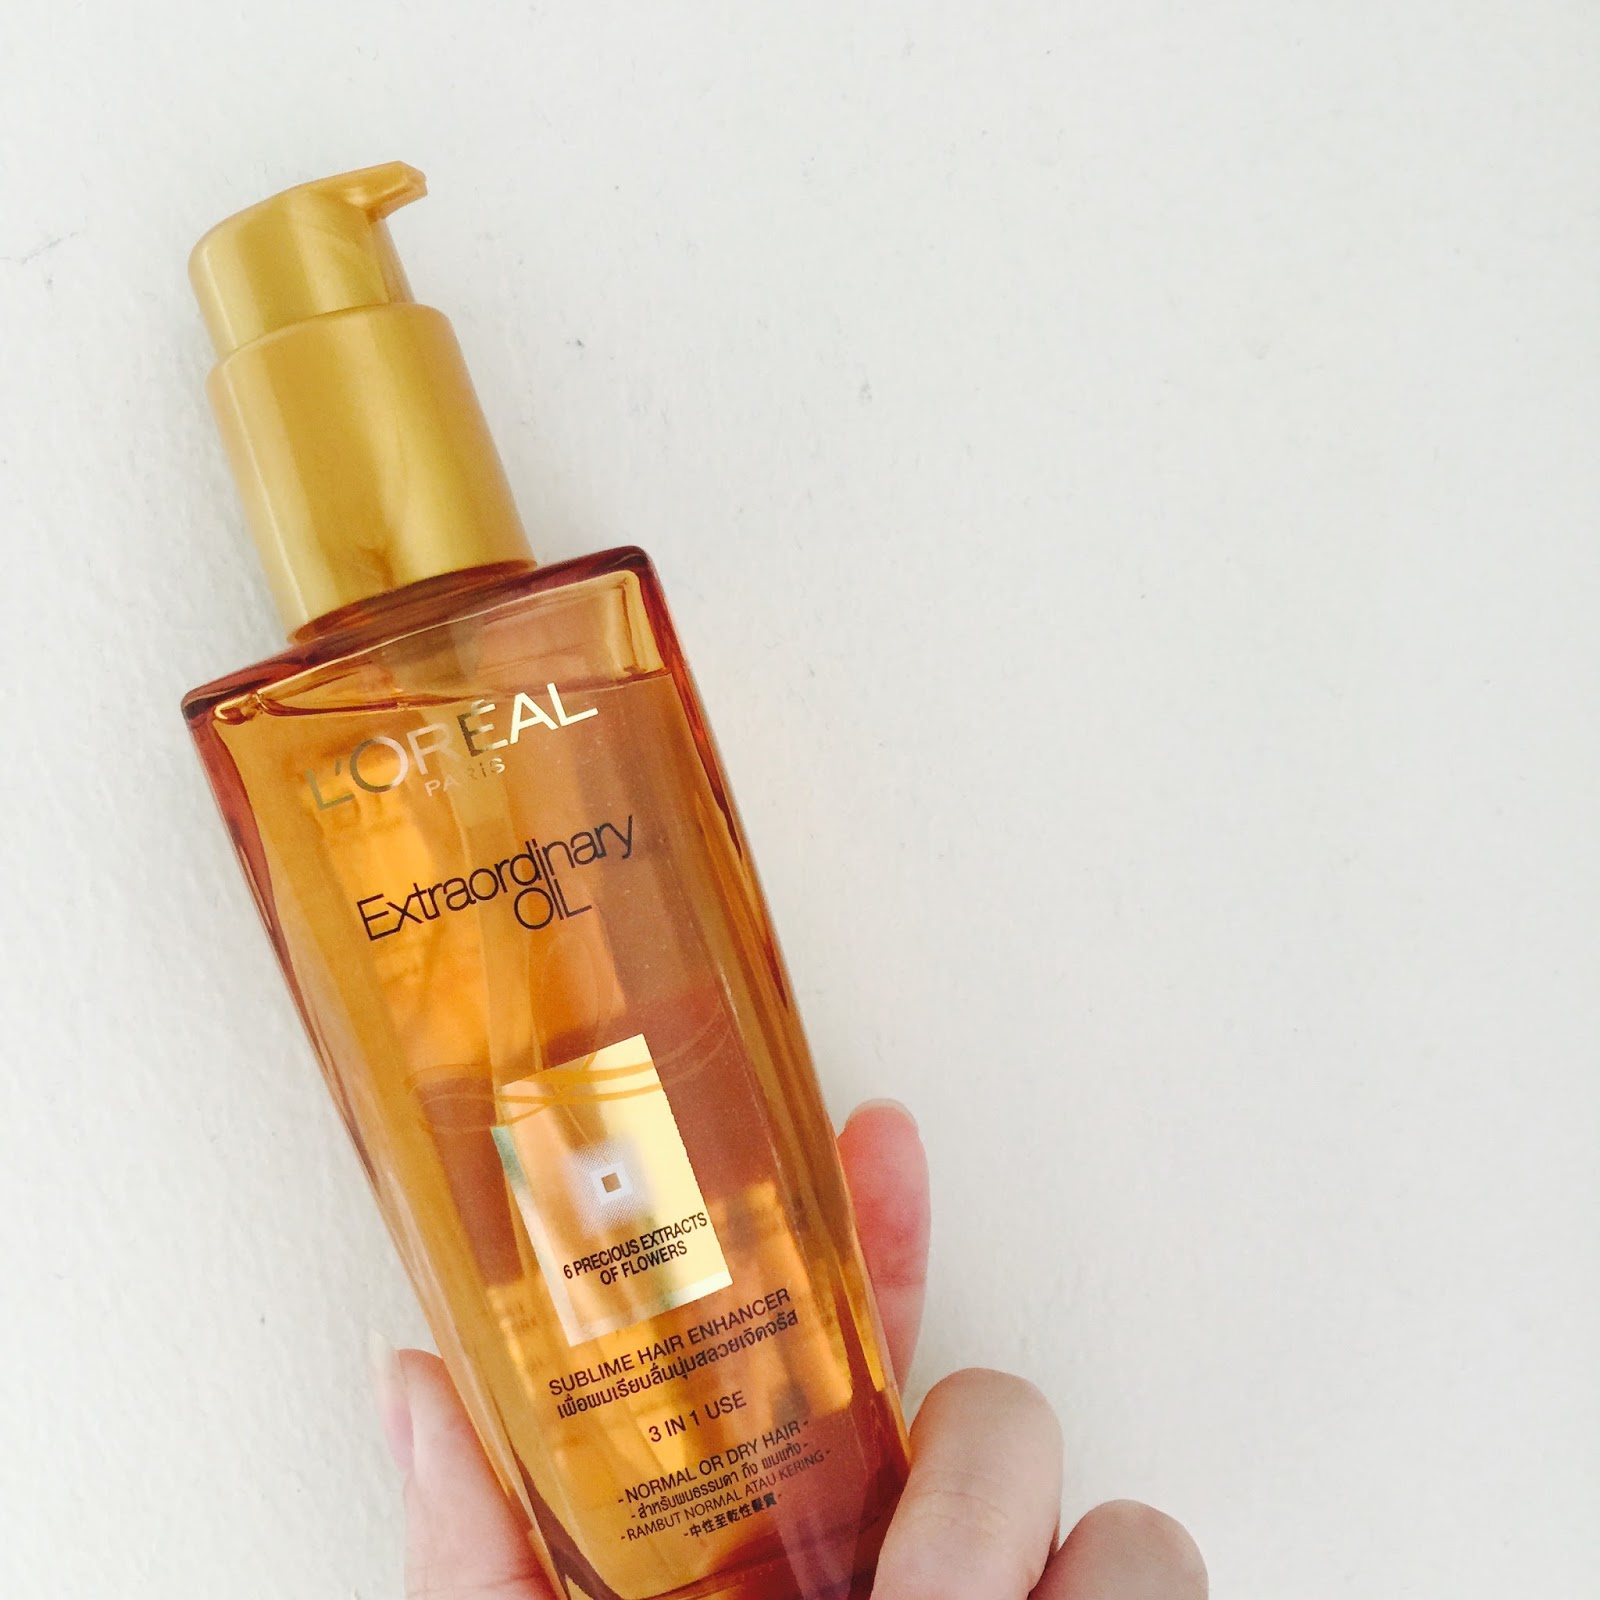 L'Oreal Extraordinary Oil Hair Serum ingredients (Explained)